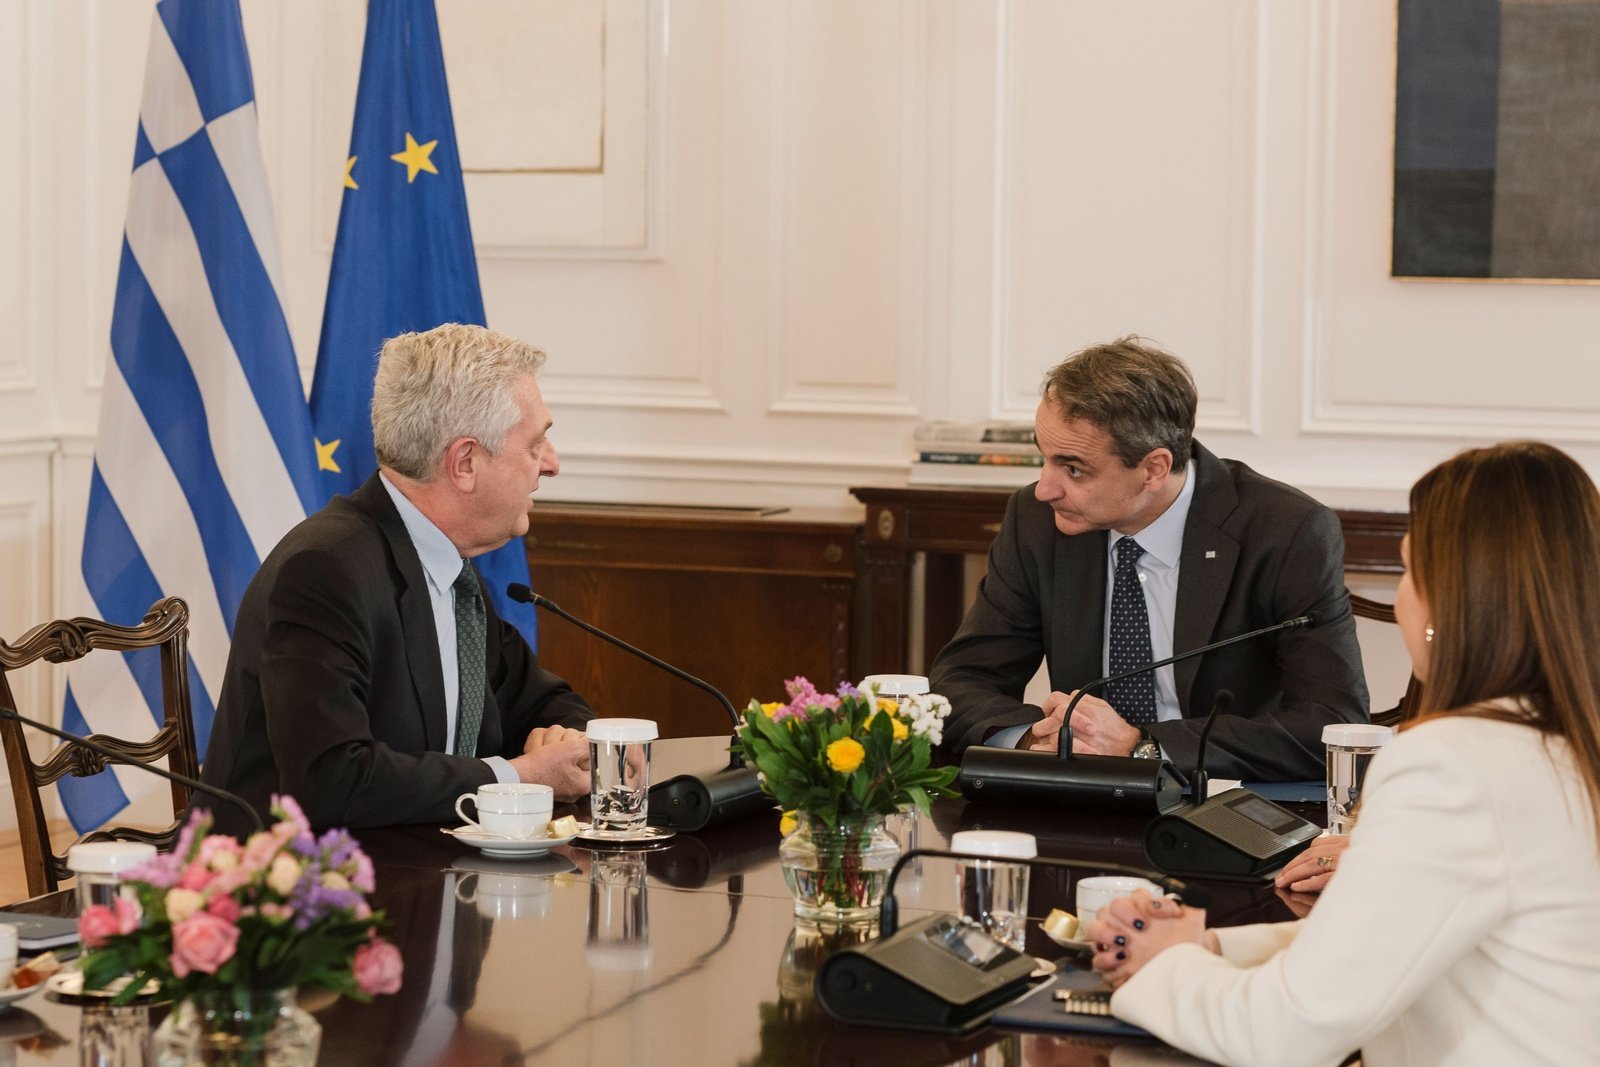 The United Nations High Commissioner for Refugees, Filippo Grandi, during a meeting with Greek Prime Minister Kyriakos Mitsotakis, at the Maximos Mansion in Athens, Greece.